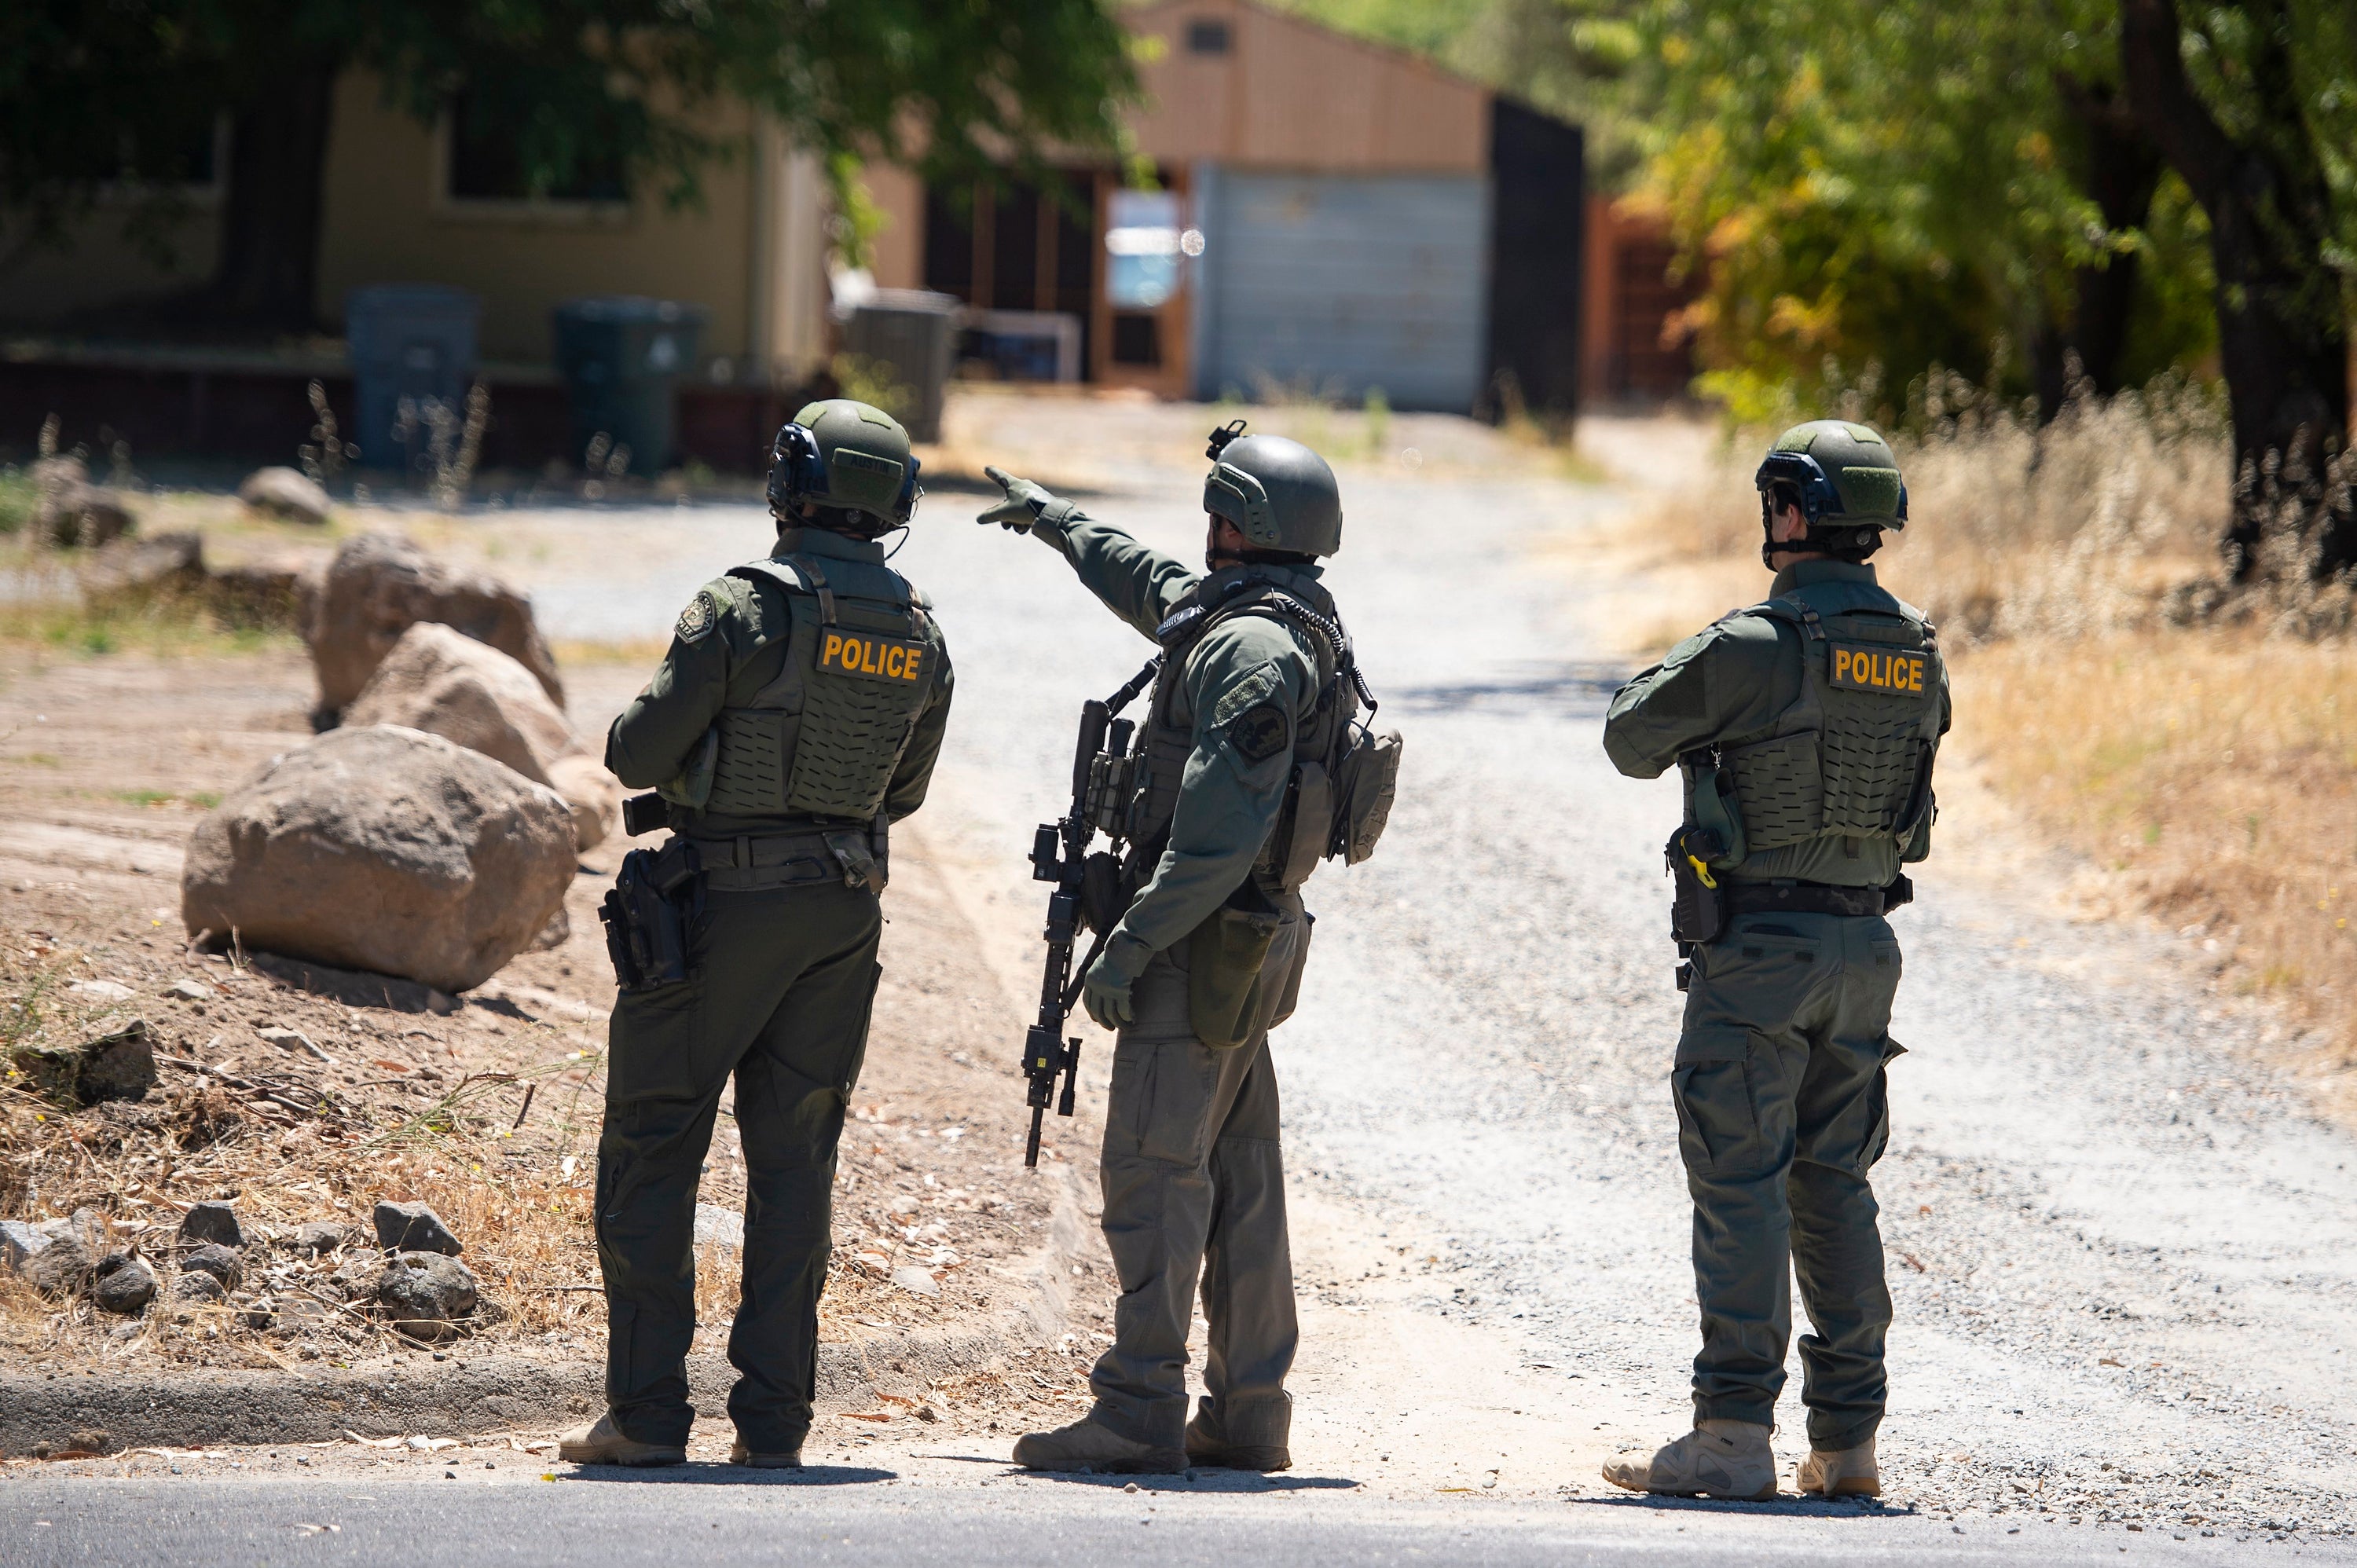 A Placer County Sheriff's deputy, joined by two police officers, points toward a home on Greenbrae Road